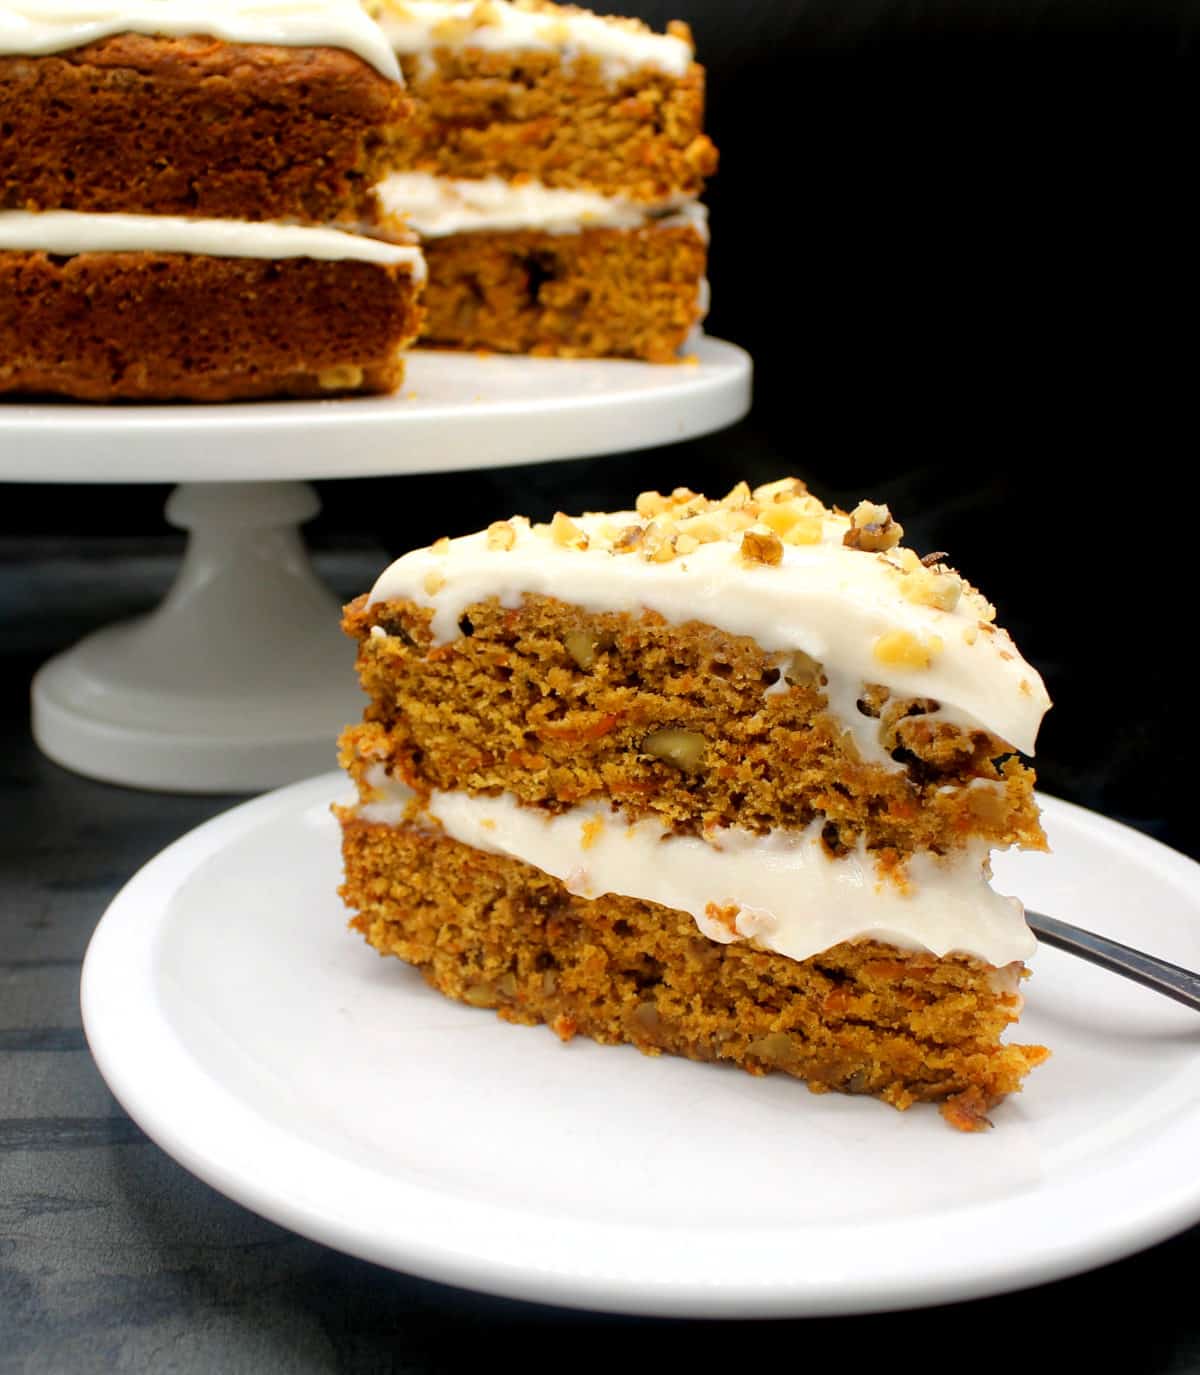 Slice of vegan carrot cake on white plate with cake on cake stand in background.